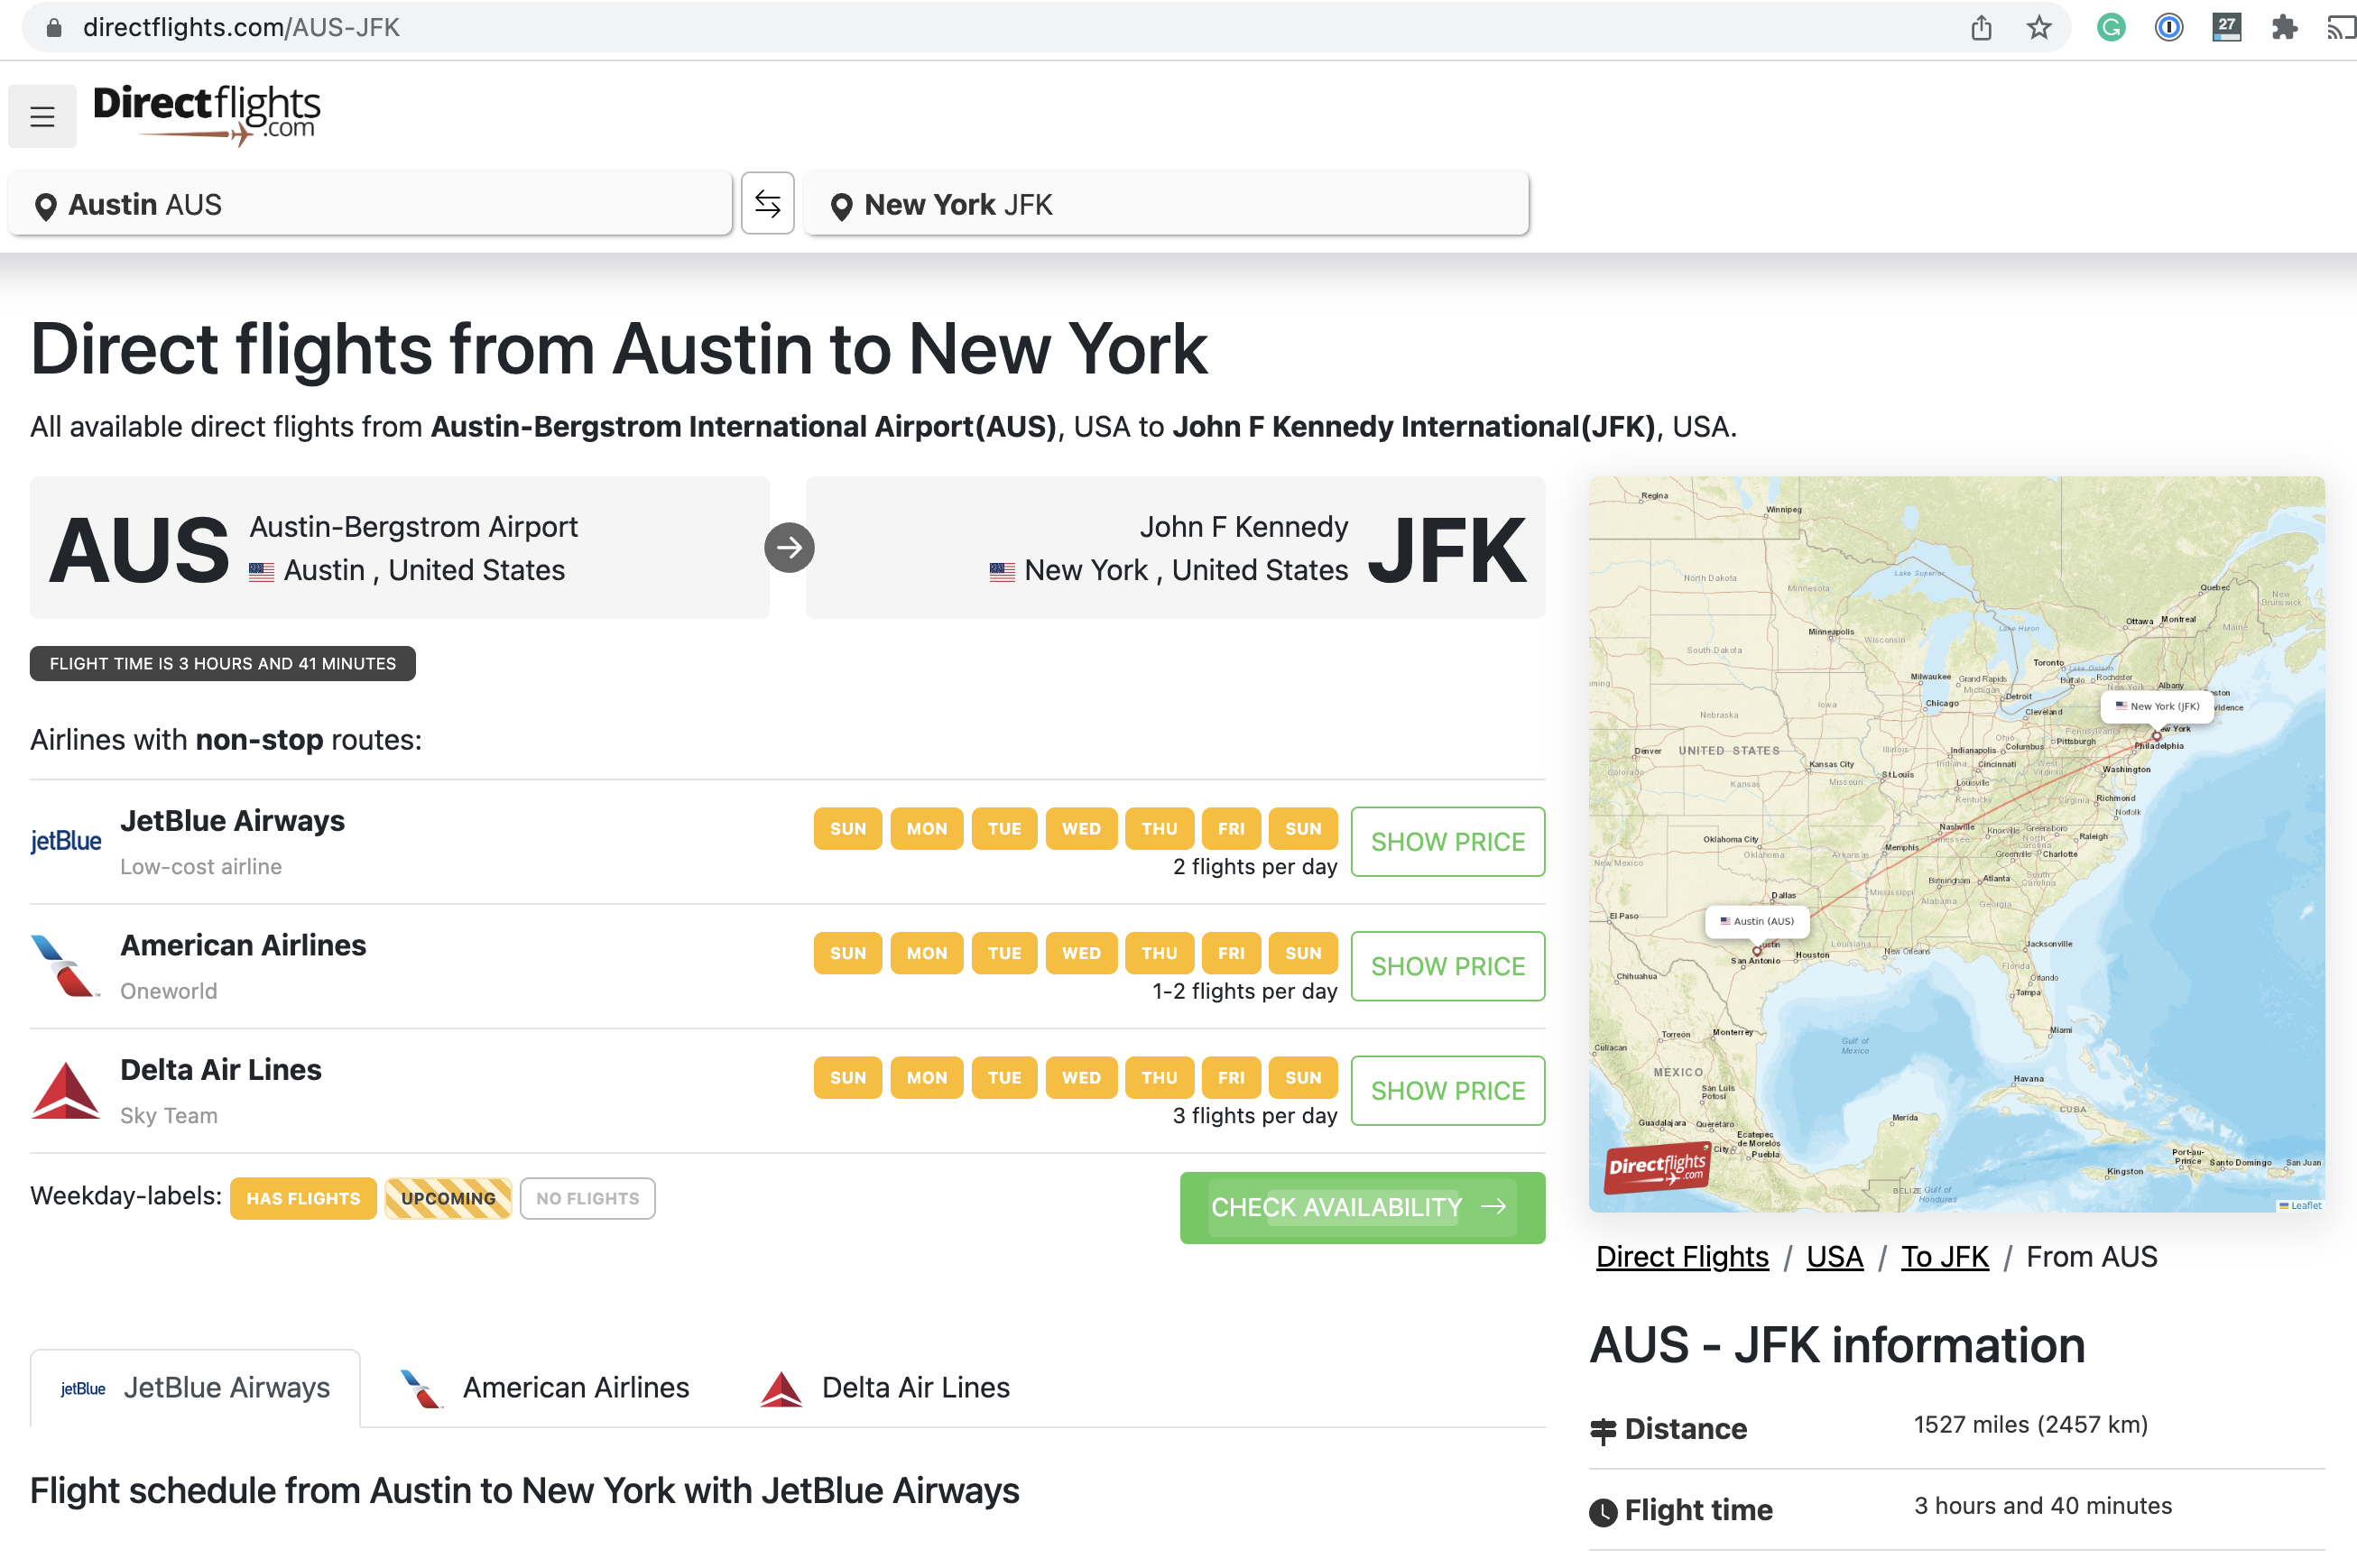 Screenshot of the results page when searching Directflights.com for cheap direct flights from Austin to JFK